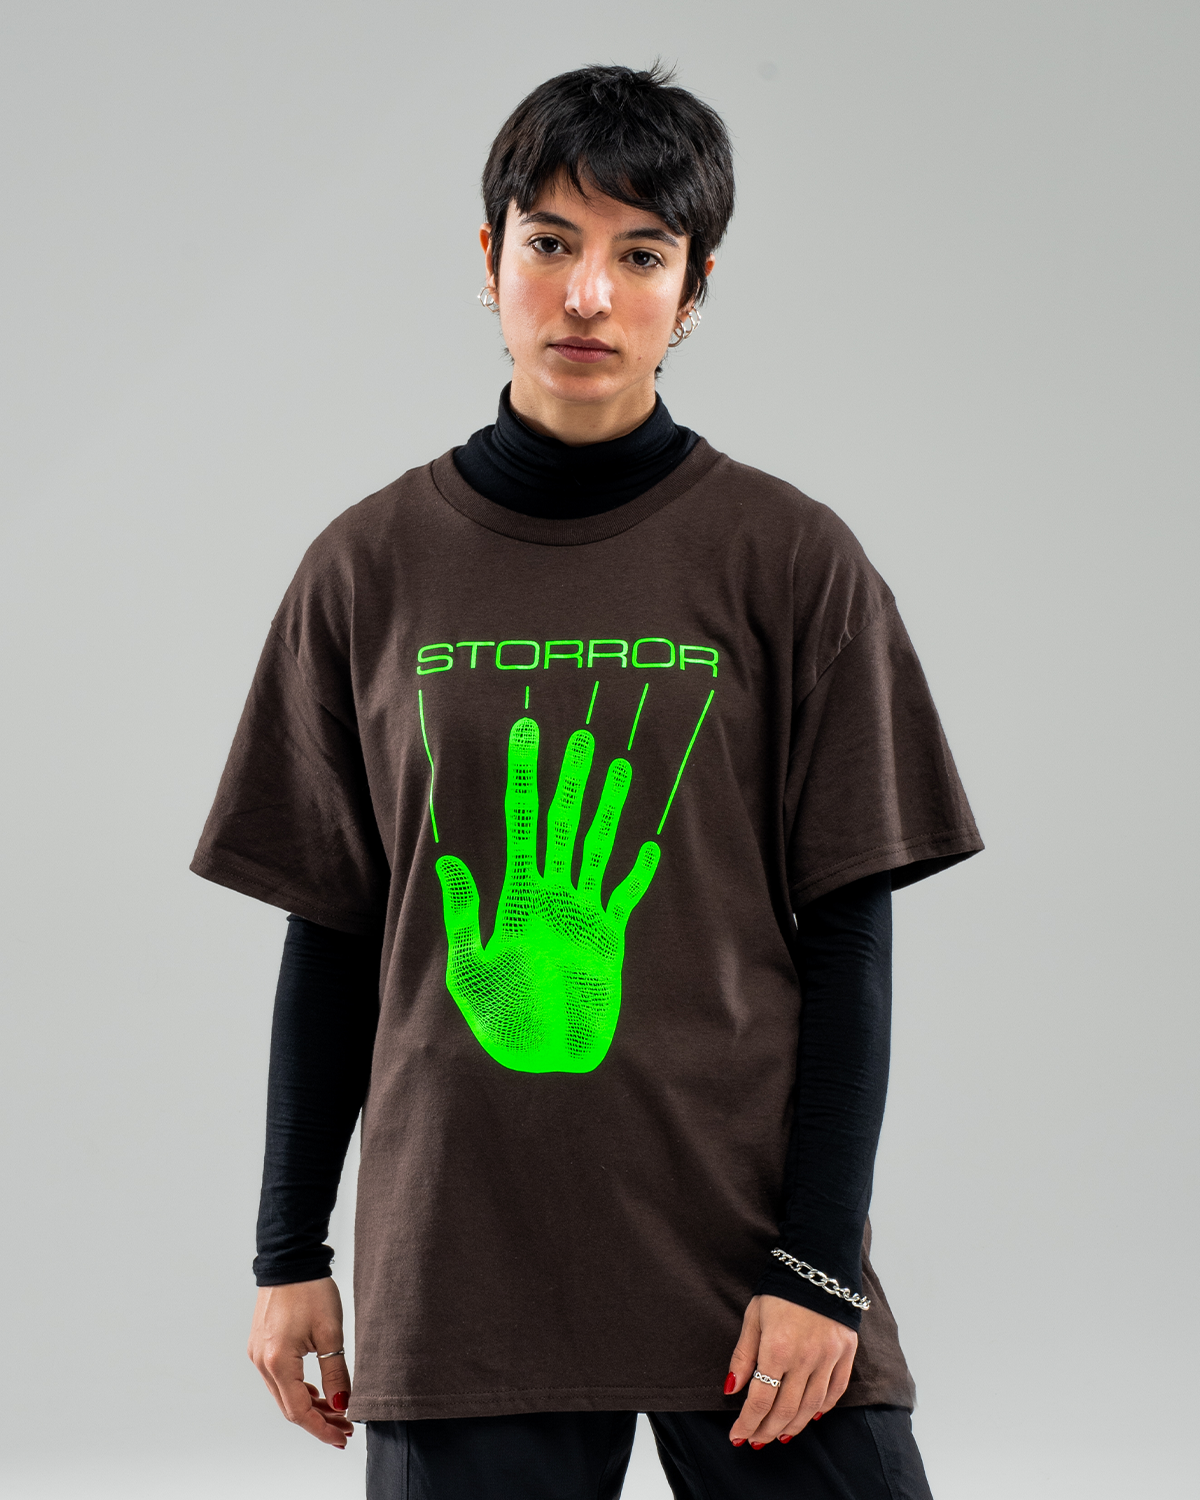 HAND T-SHIRT | STORROR | parkour clothing & technical sportswear